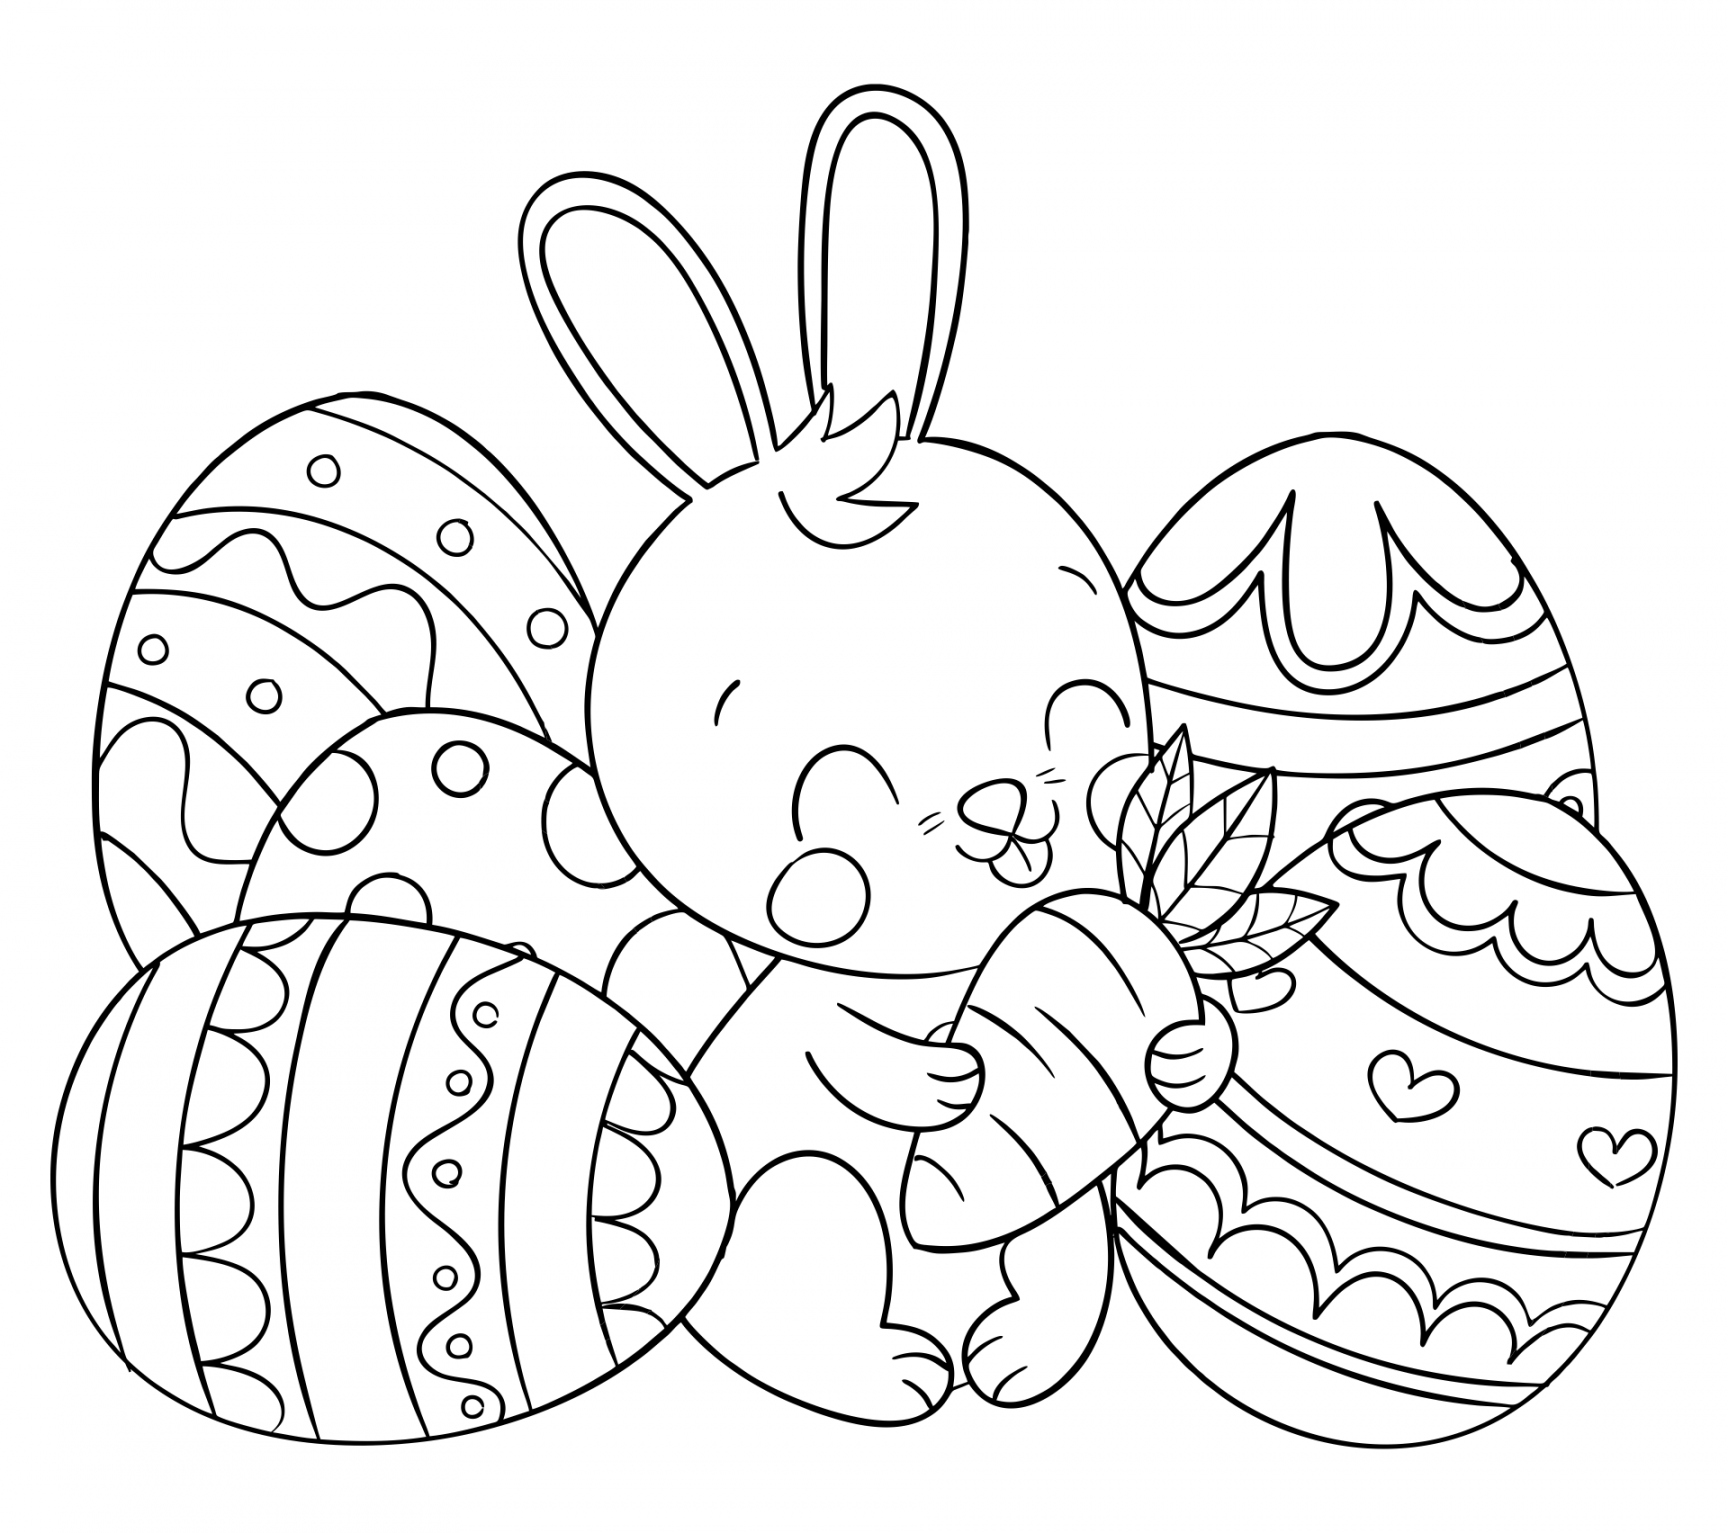 Easter Free Printable Coloring Pages - Printable -  Best Free Printable Easter Egg Coloring Page - printablee